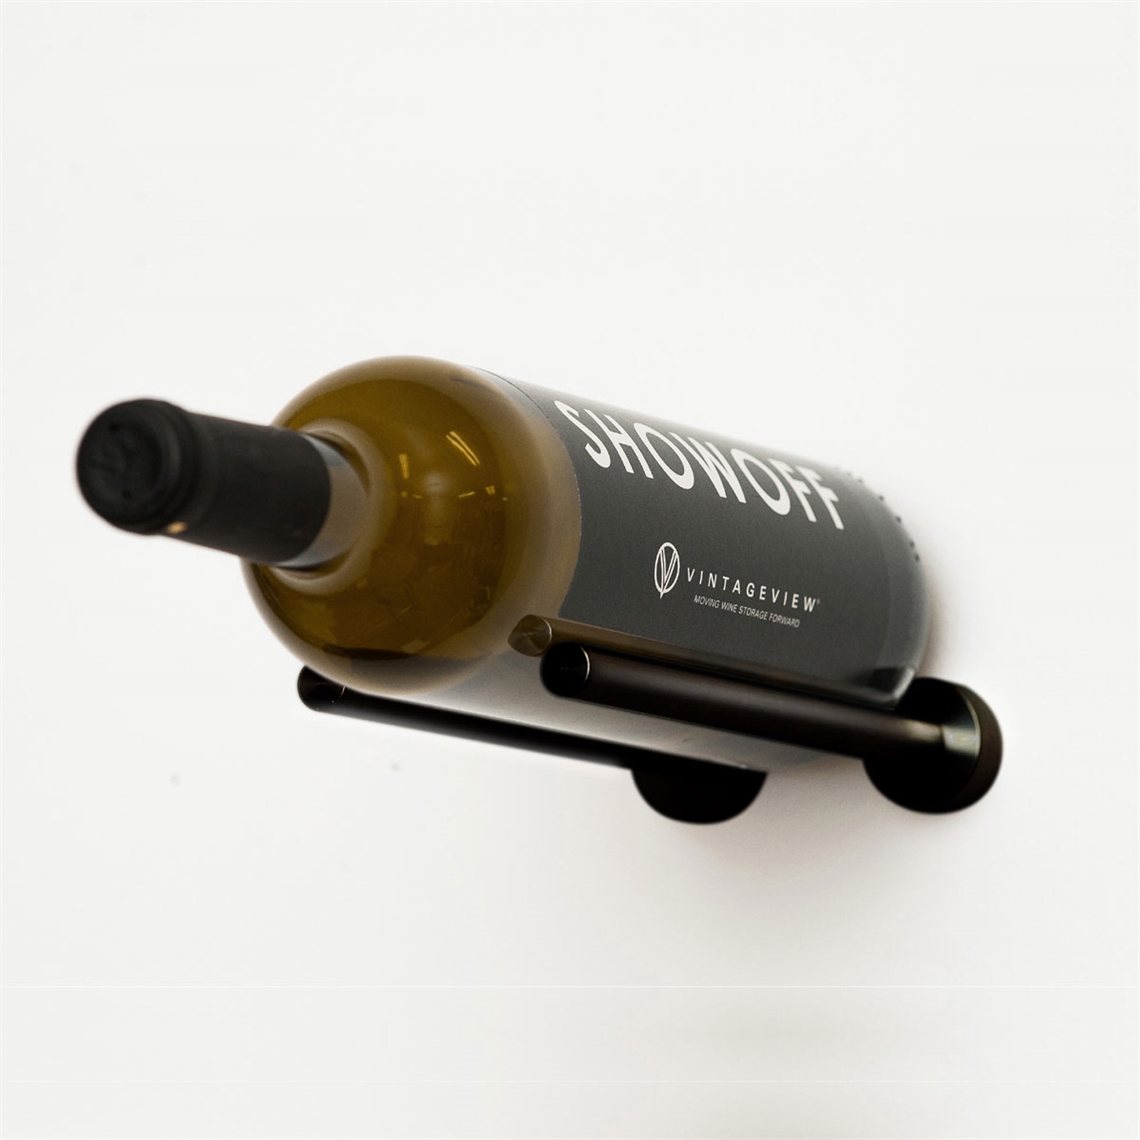 View more assembled wine racks from our Wall Mounted Wine Racks range